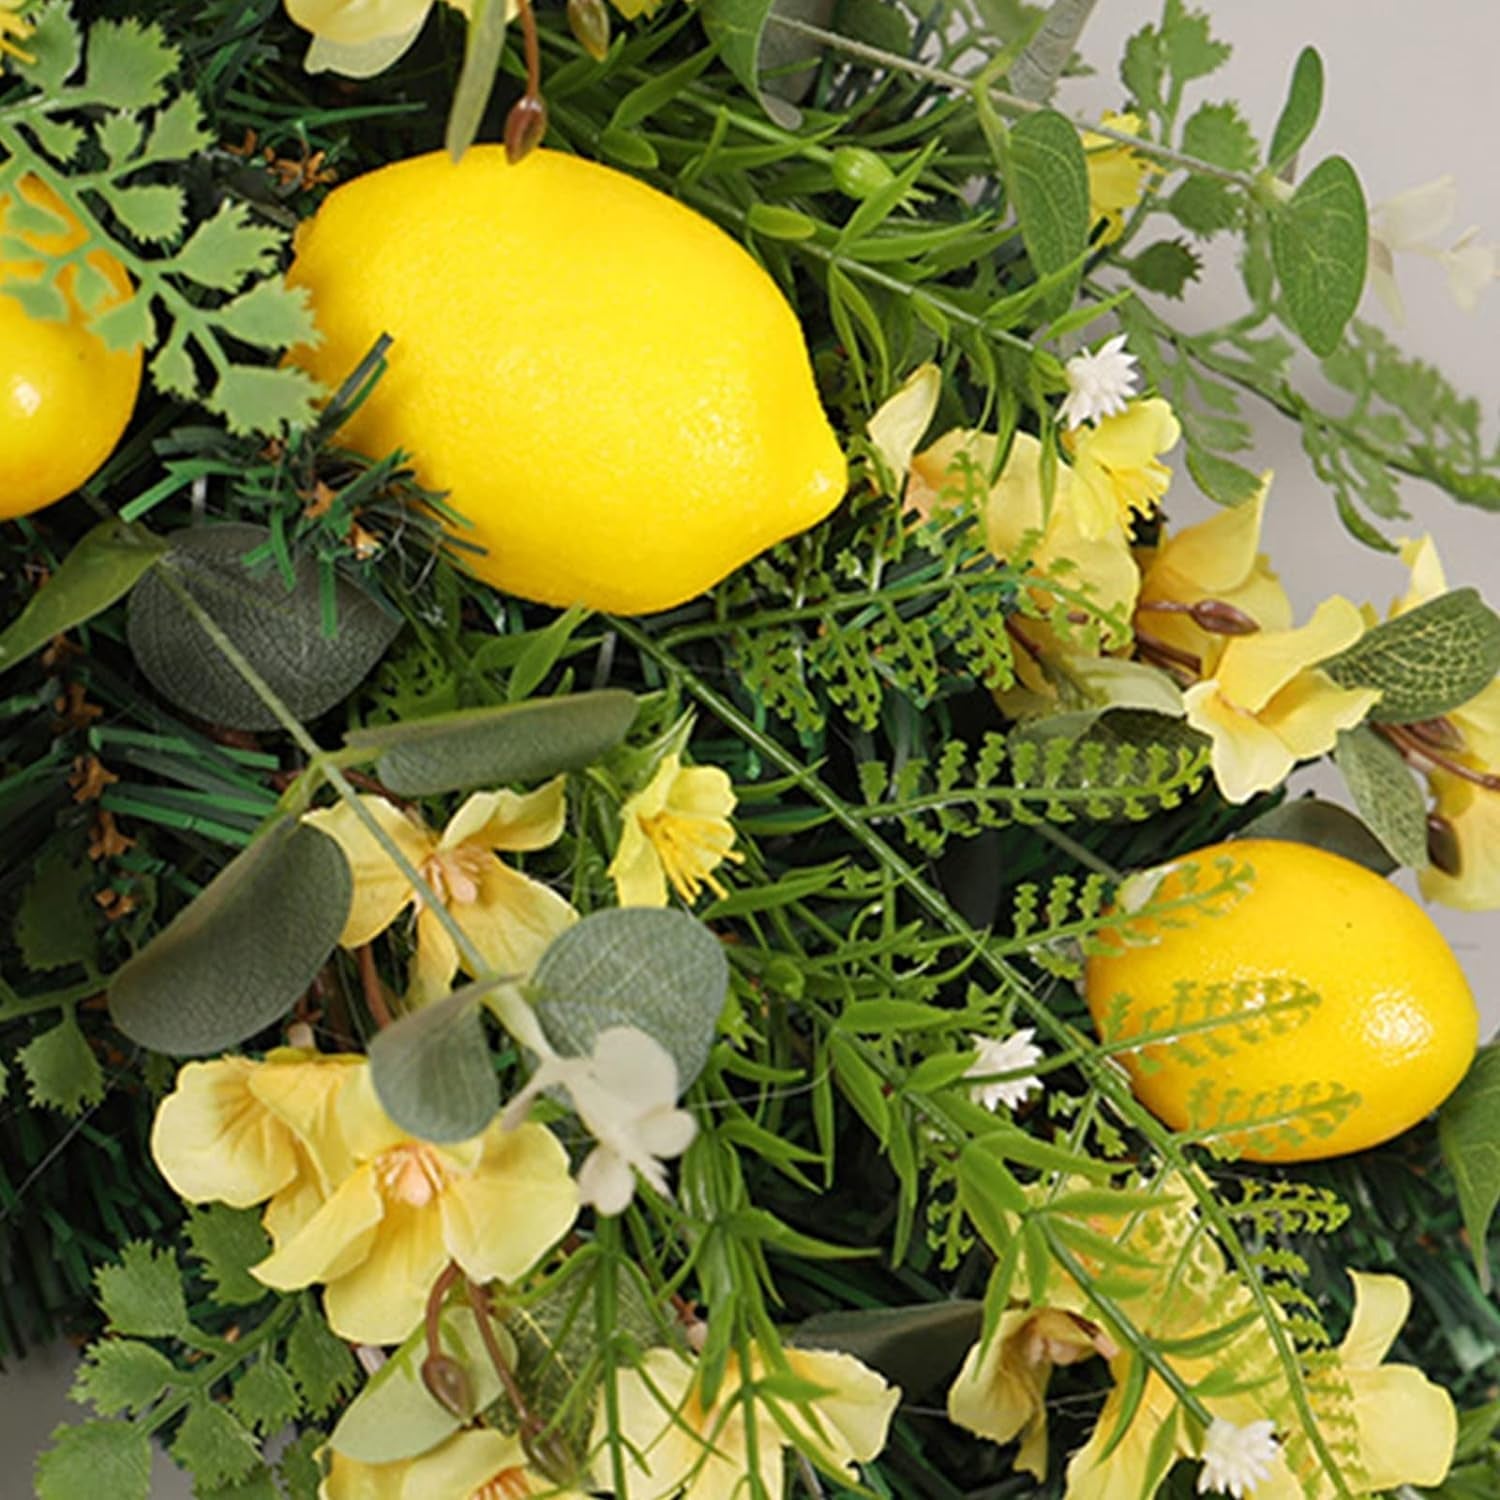 Firlar 27.56 Inch Artificial Lemon Wreath, Handmade Lemon Swag for Front Door Decor, with Streamers Lemon Hanging Upside down Tree, Wall Hanging Spring Summer Teardrop Wreath with Green Leaves Riband